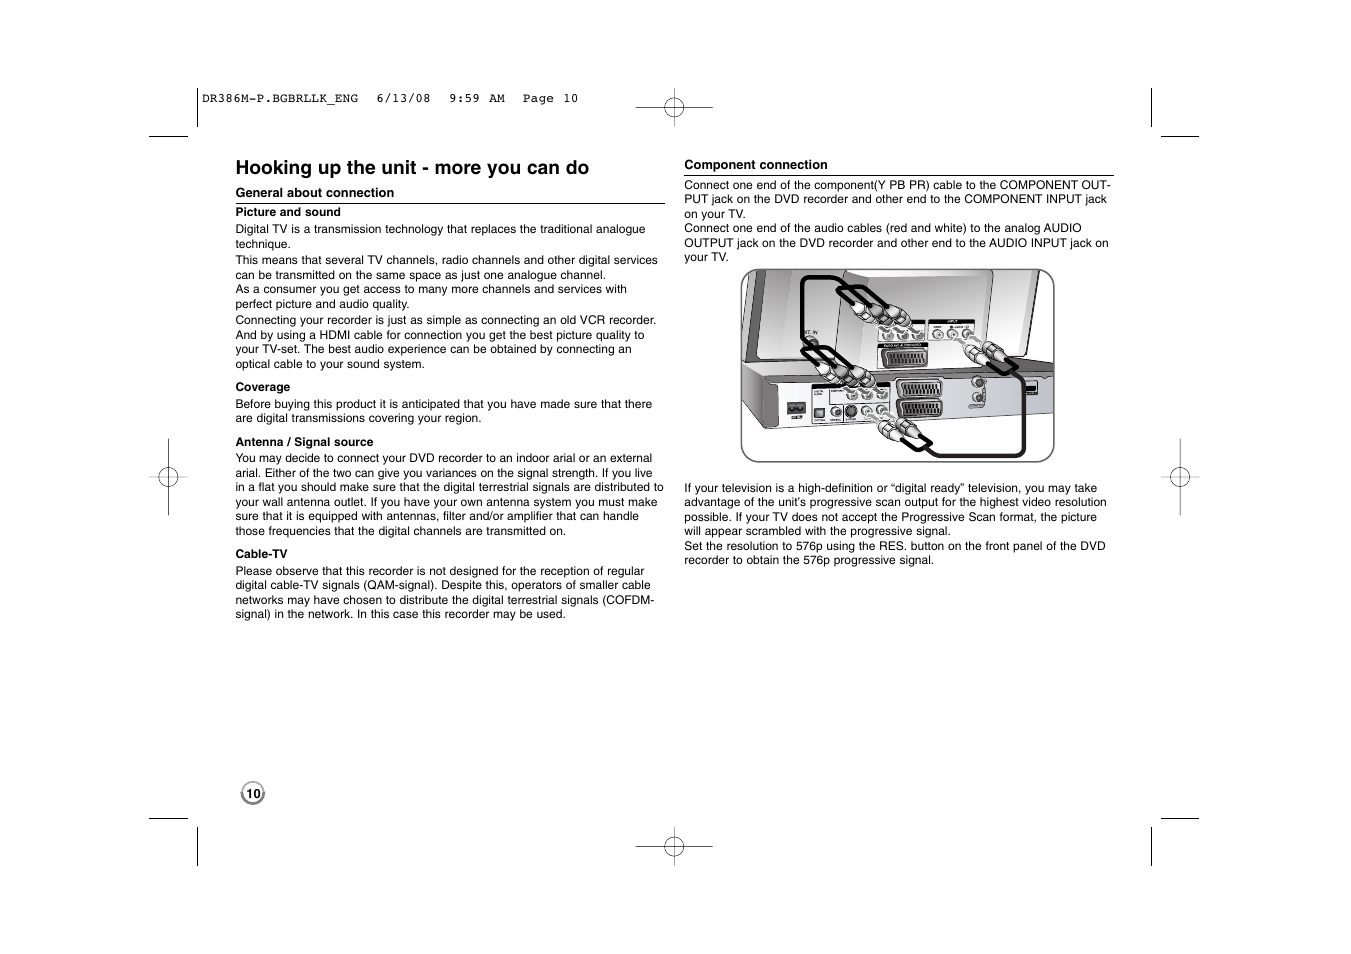 Hooking up the unit - more you can do | LG DRT389H User Manual | Page 10 / 40